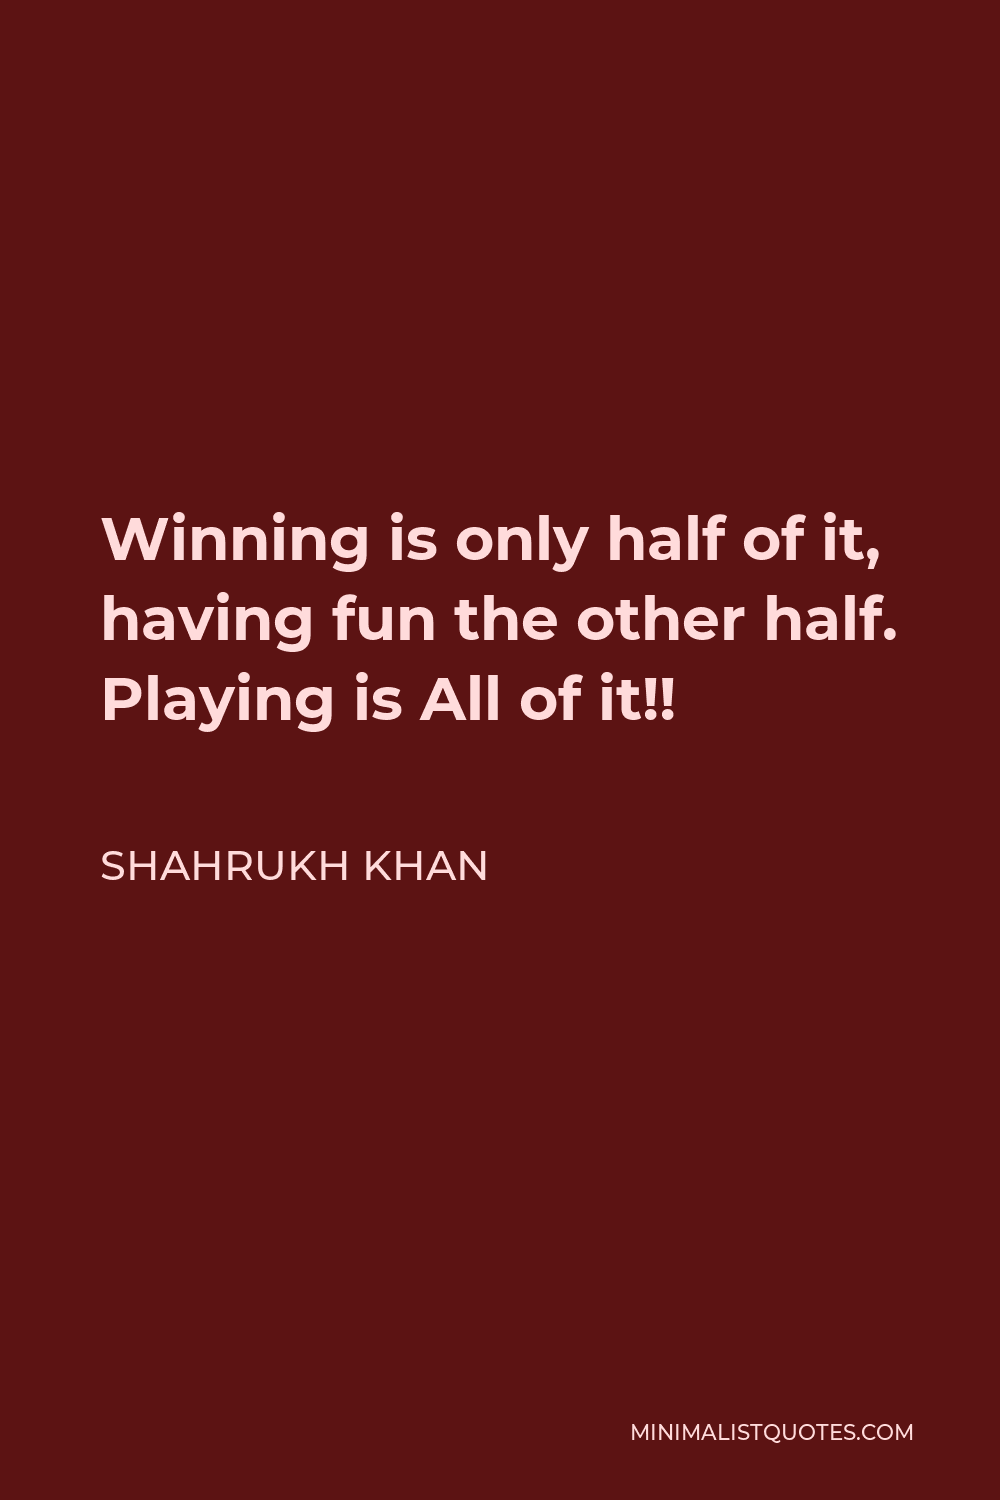 Shahrukh Khan Quote - Winning is only half of it, having fun the other half. Playing is All of it!!